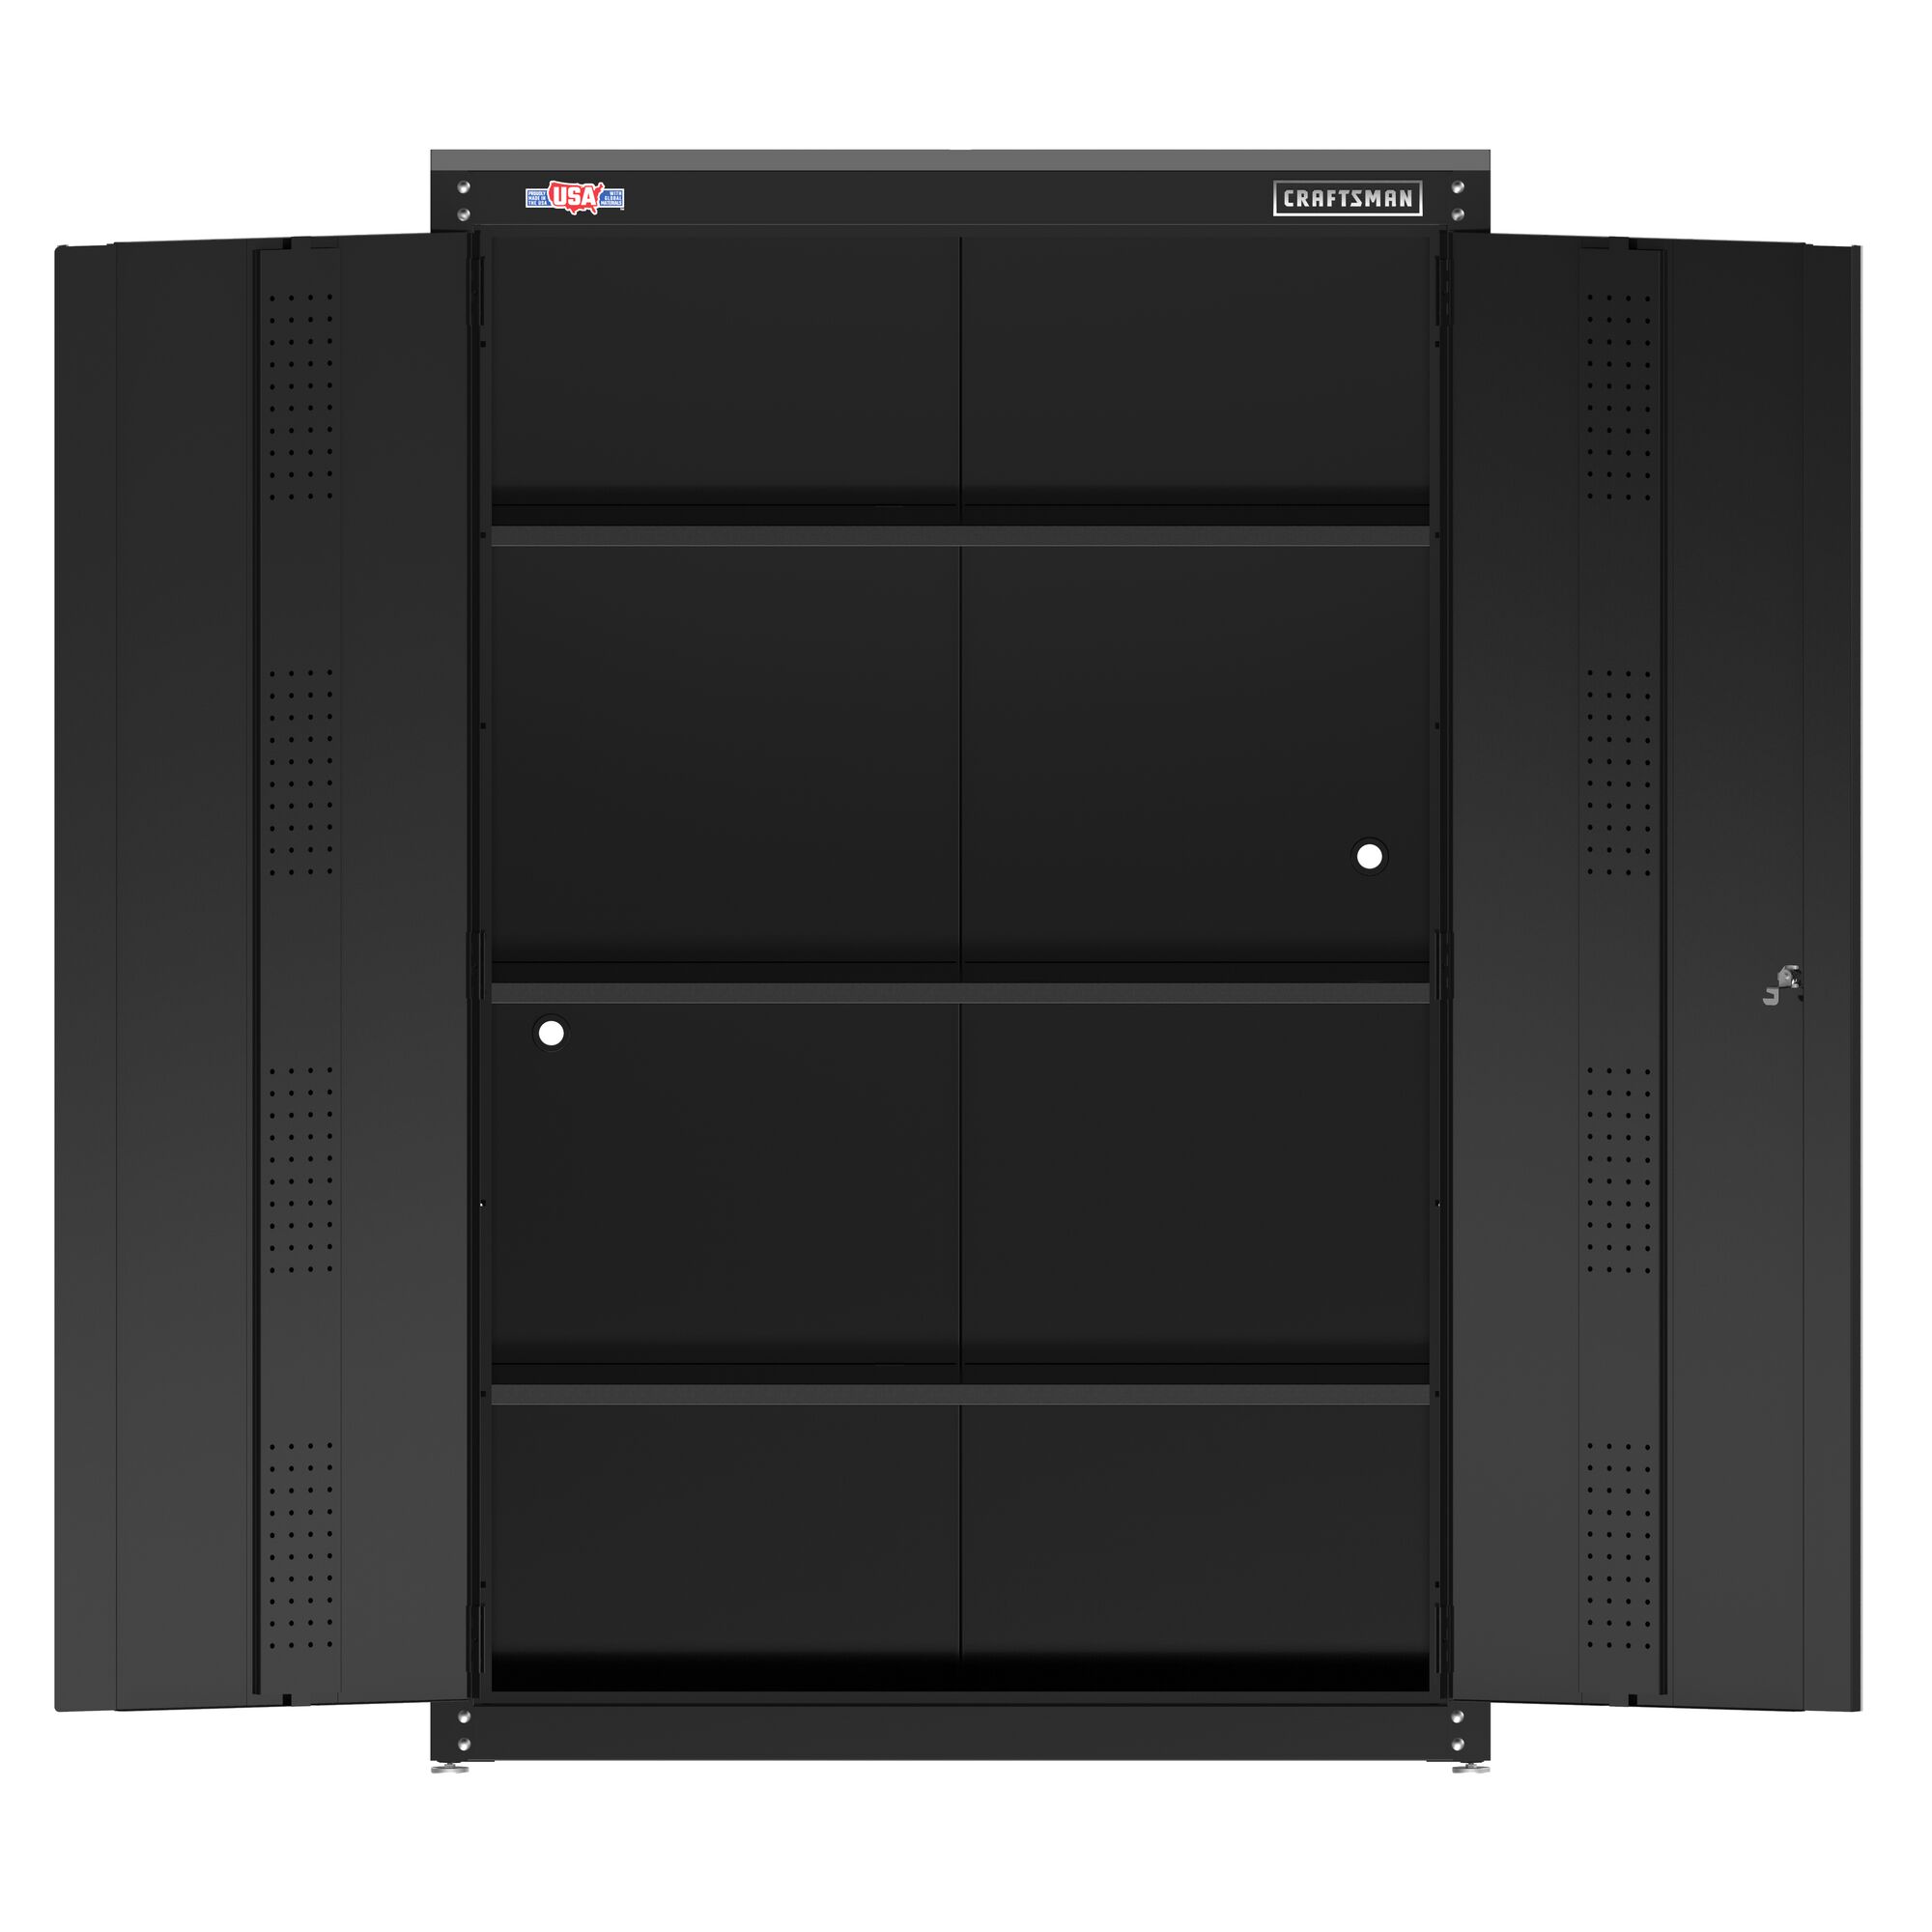 CRAFTSMAN 48-in wide storage cabinet straight forward view with doors open